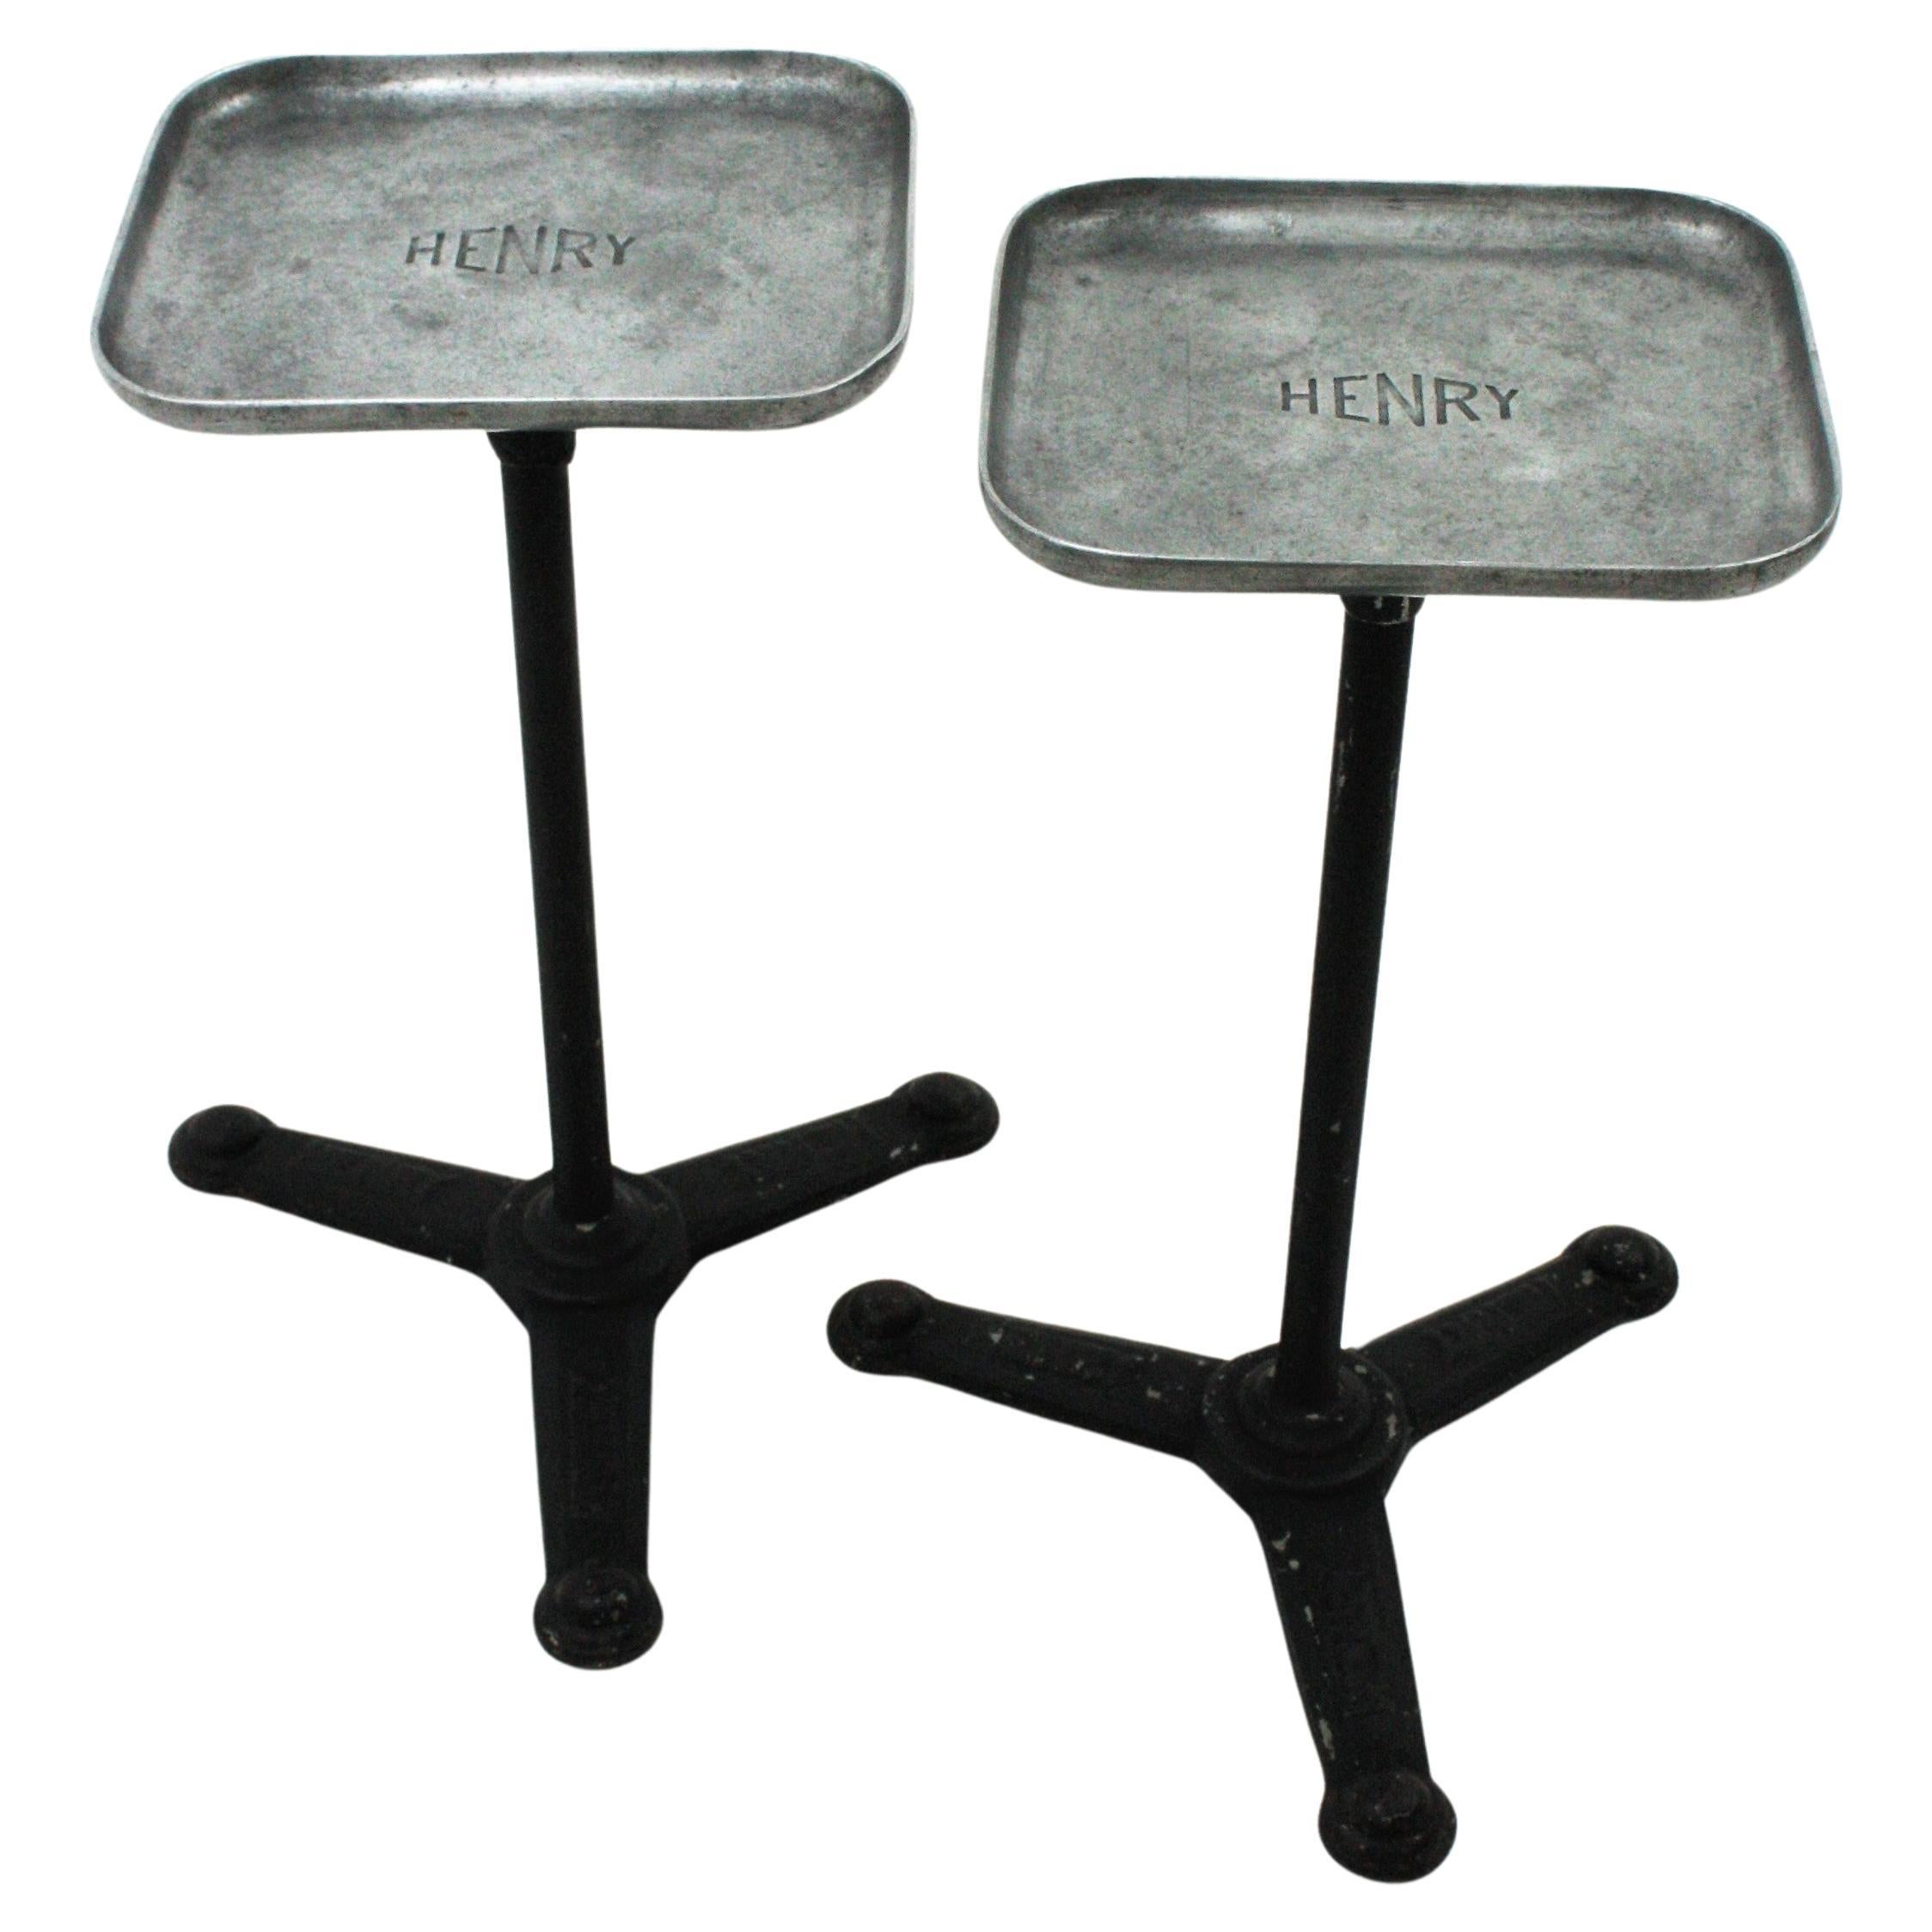 Pair of aluminium and iron spanish drinks tables, 1960s
Rectangular aluminium tops with black painted iron tripod bases.
Originally used as hairdresser work stand tripod tables by Henry Colomer beauty salon and hairdressing supplier.
These